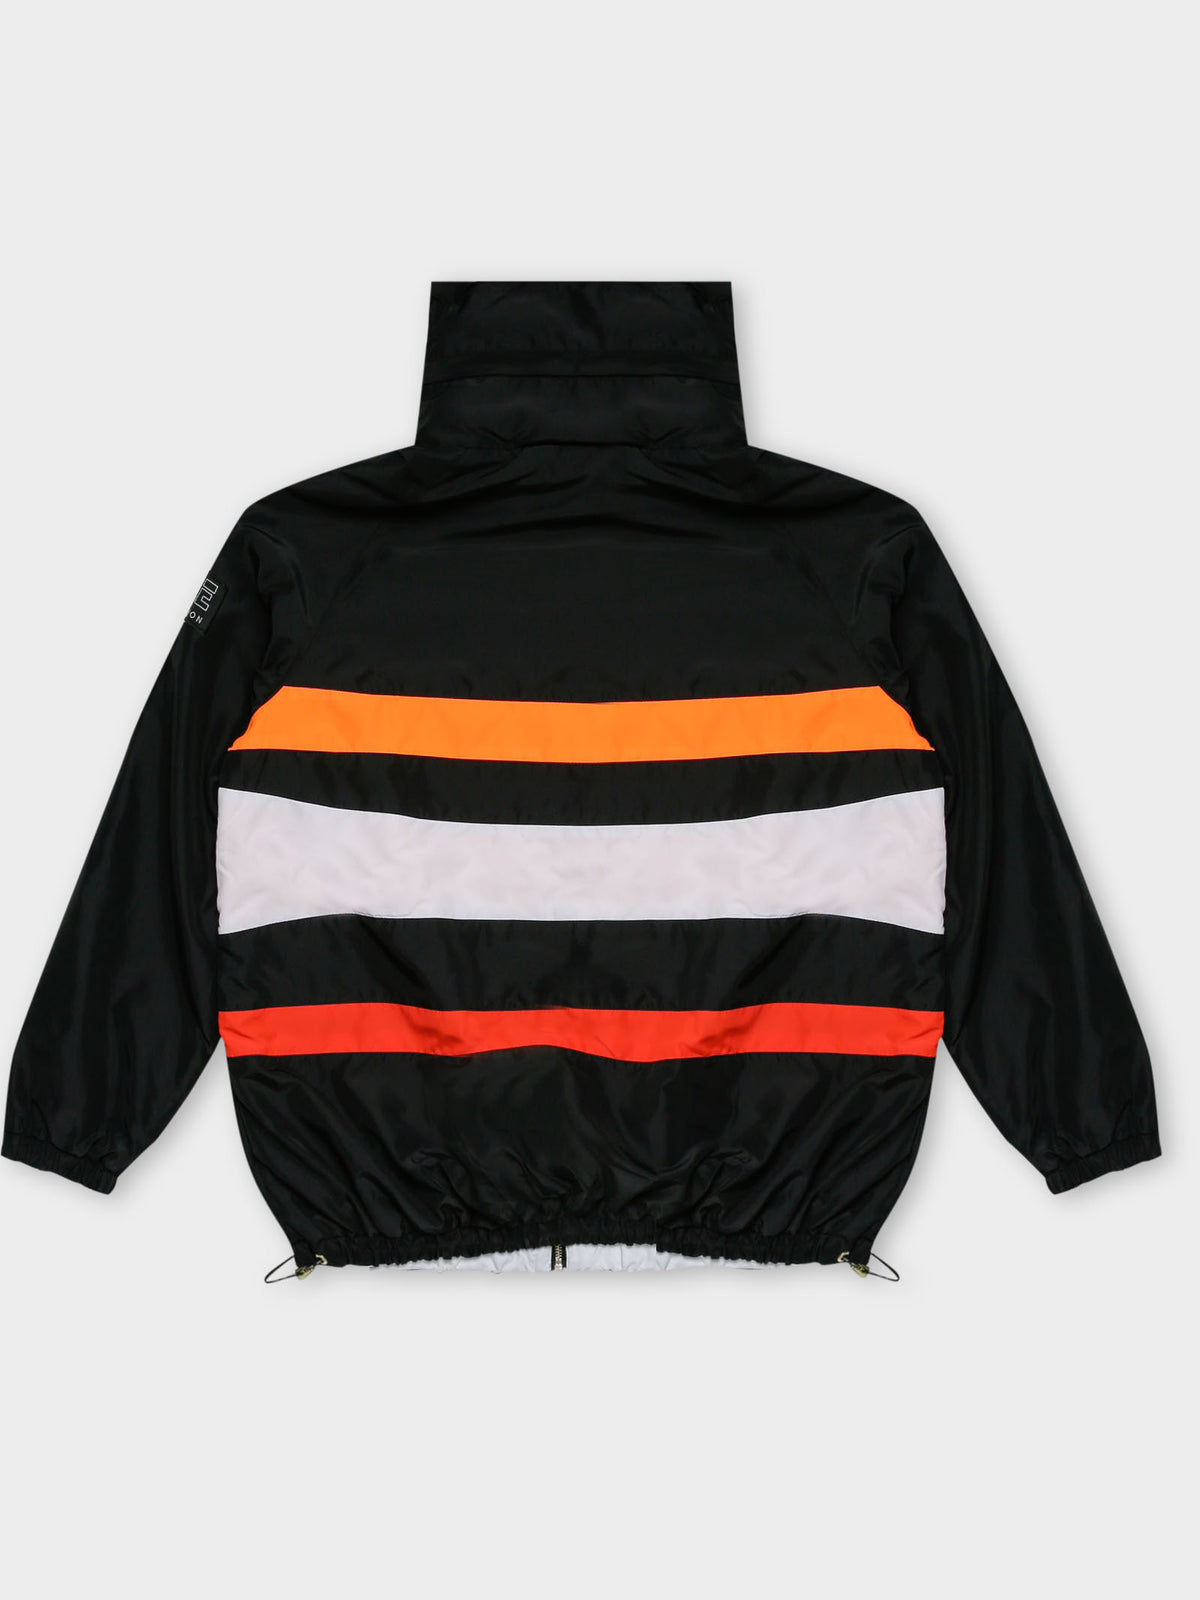 Legacy Recycled Jacket in Black